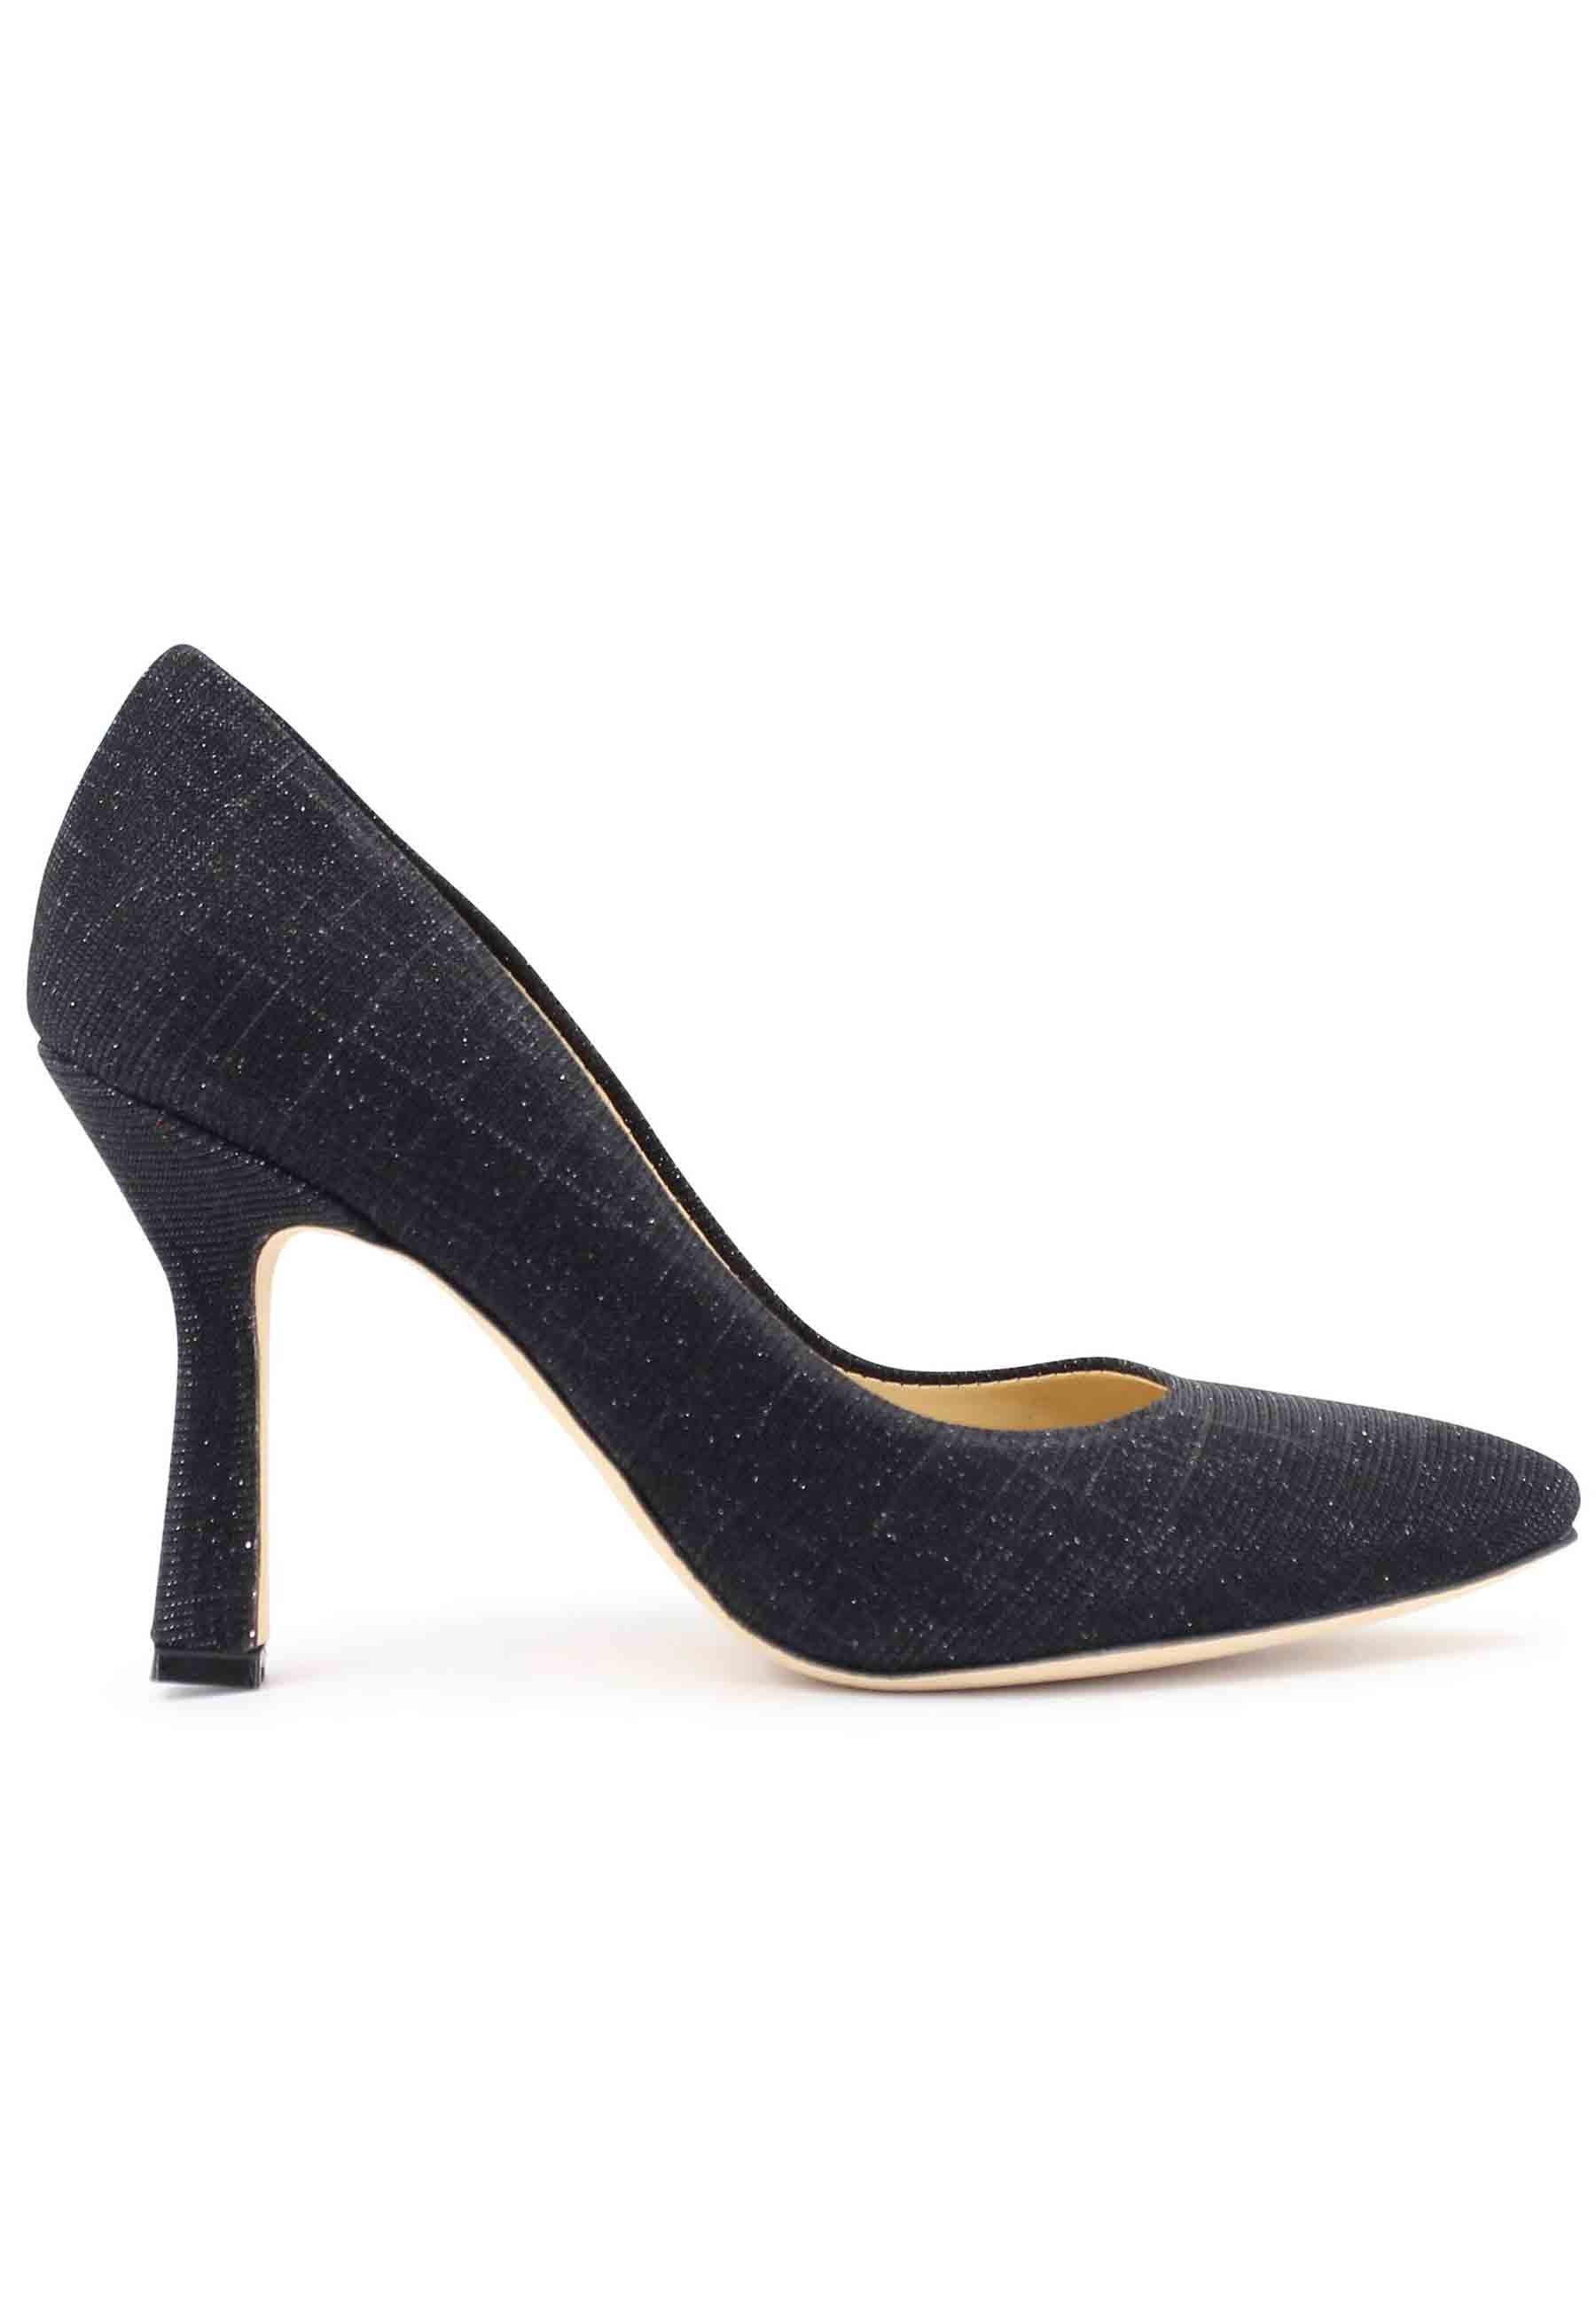 DE1002/RT women's pumps in lux midnight blue fabric with tone-on-tone high heels